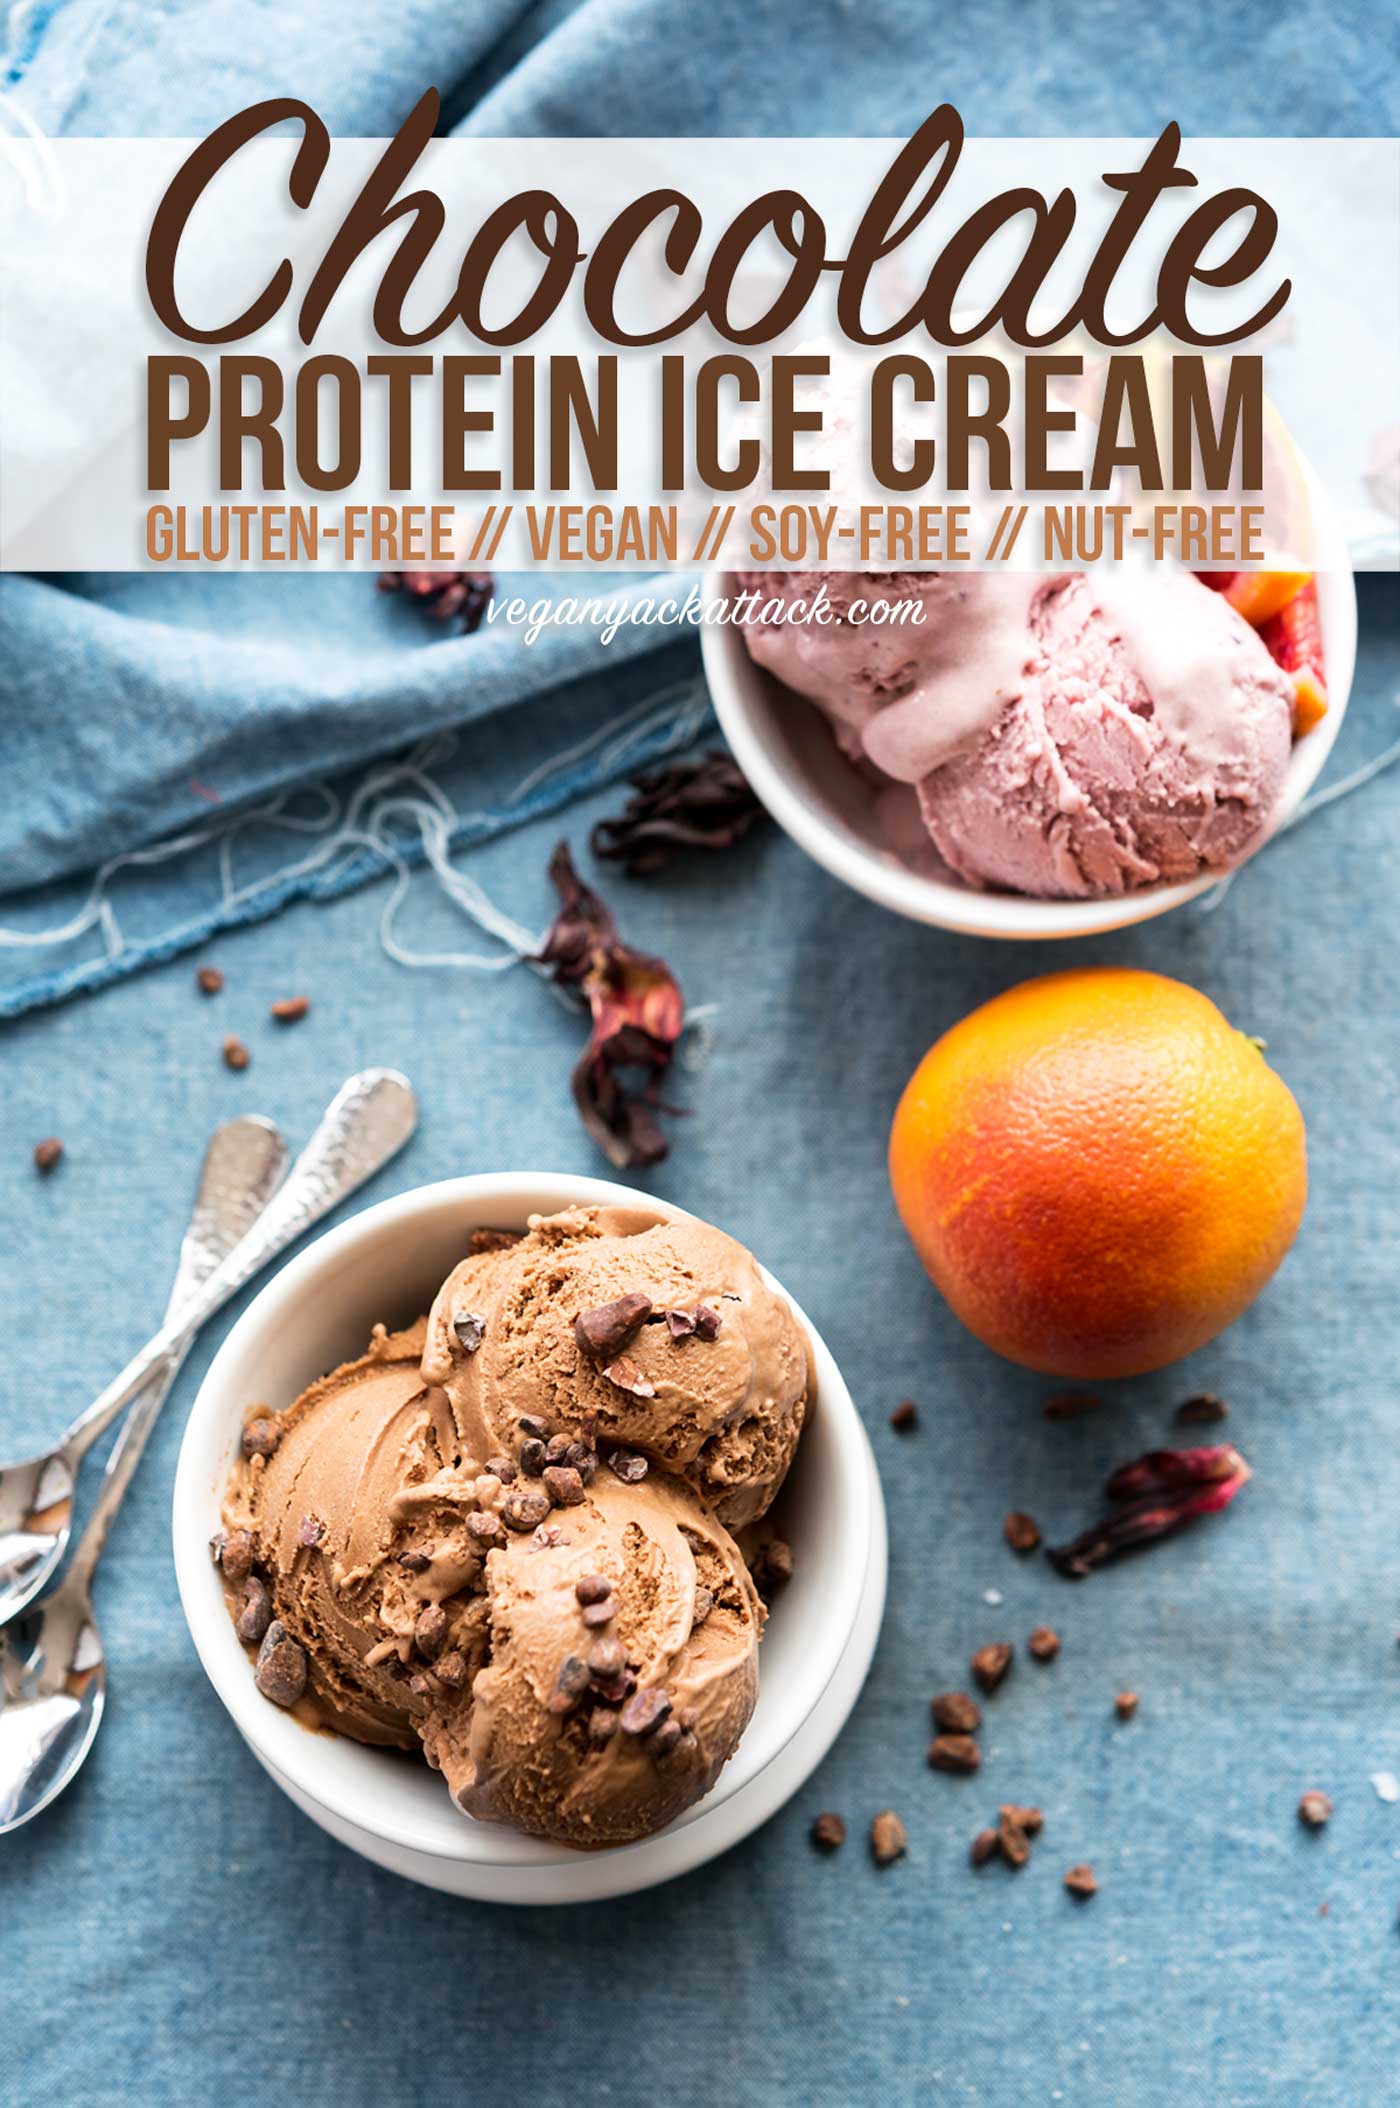 This ultra-creamy, Chocolate Protein Ice Cream is dairy-free, soy-free, nut-free and has a secret and totally unexpected ingredient - split peas! Plus, there’s a no-churn option! #vegan #glutenfree #recipe